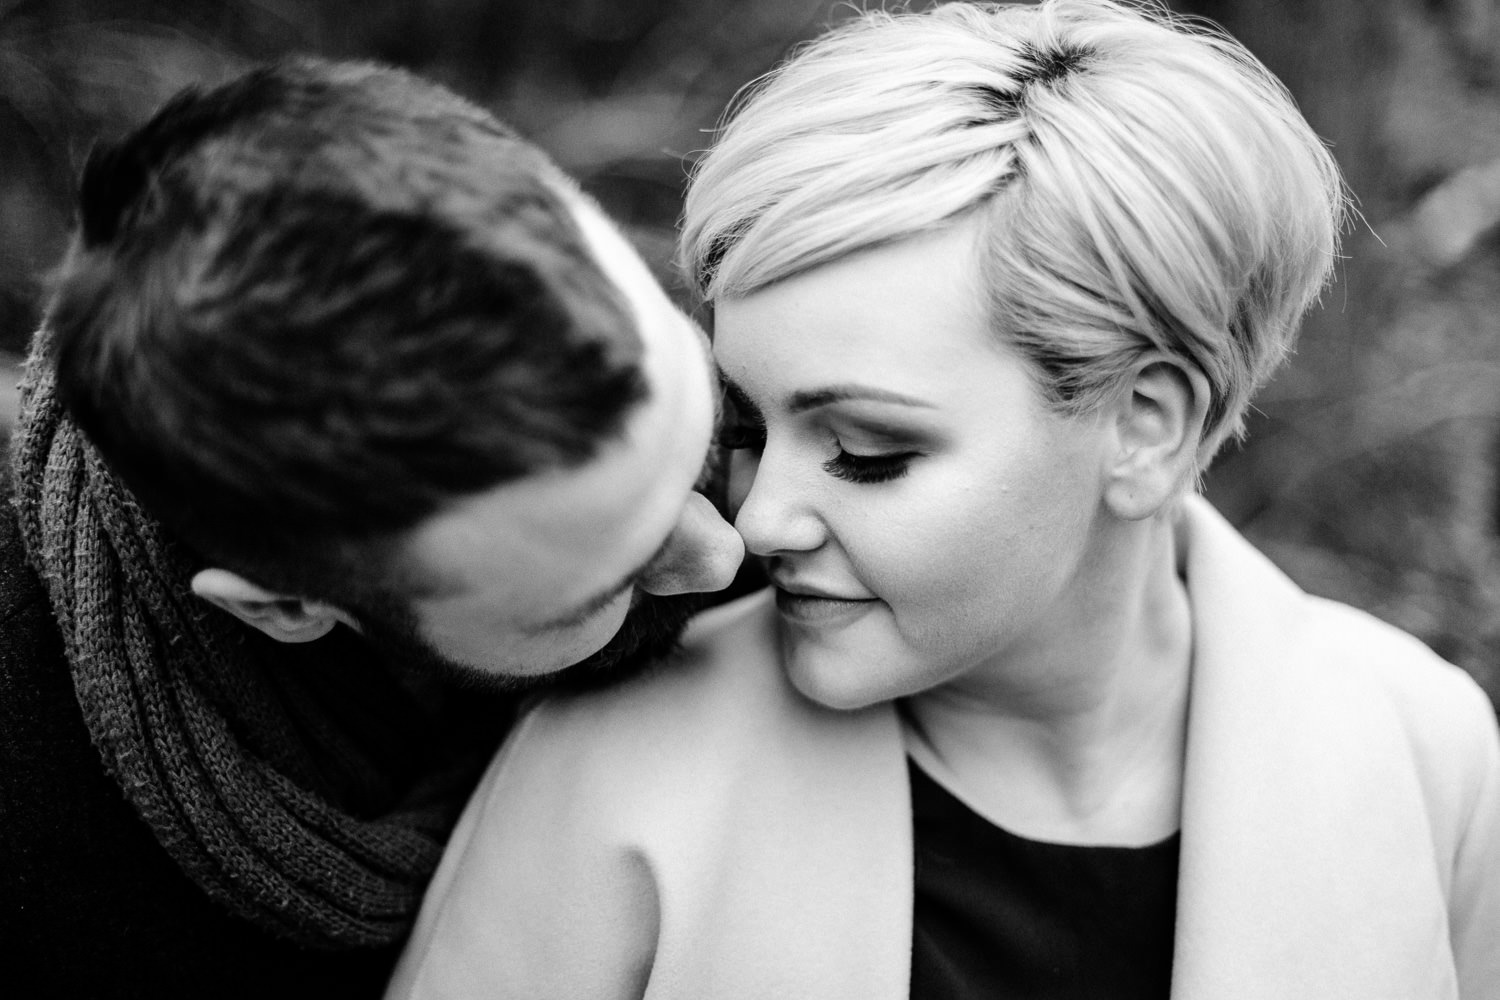 A man and woman almost kissing, on their engagement shoot by a wedding photographer